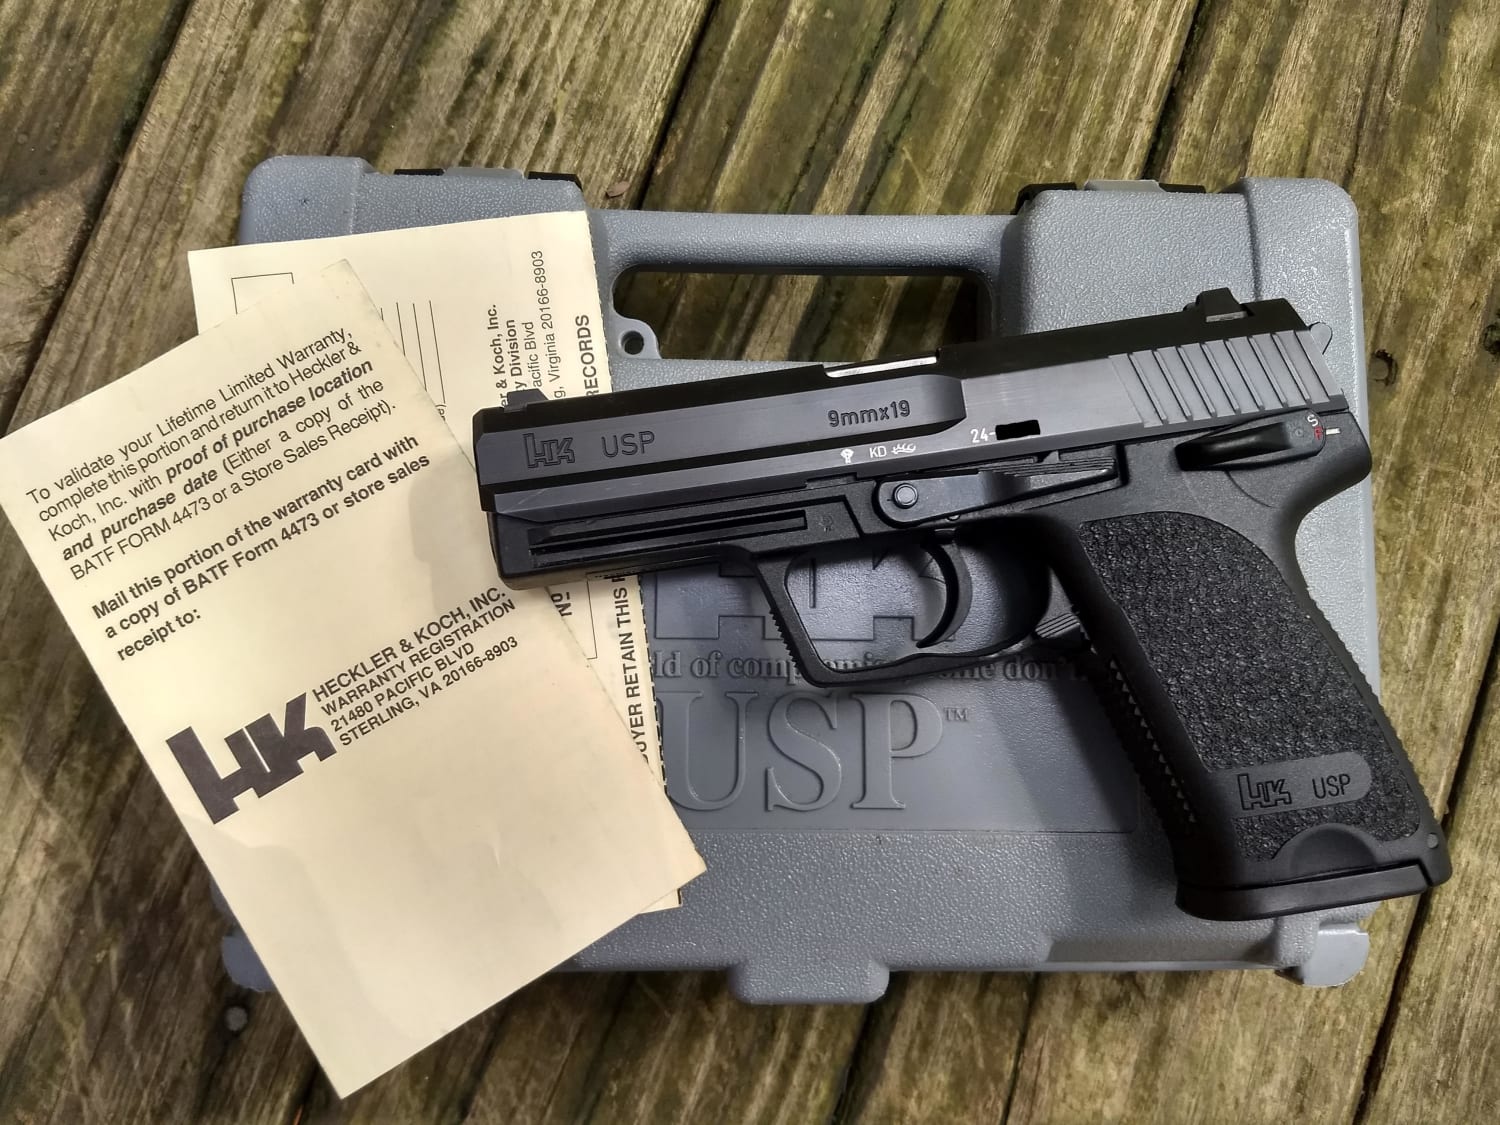 First Year of Production H&K USP9 (1993) - Think I can still send in the original warranty card?